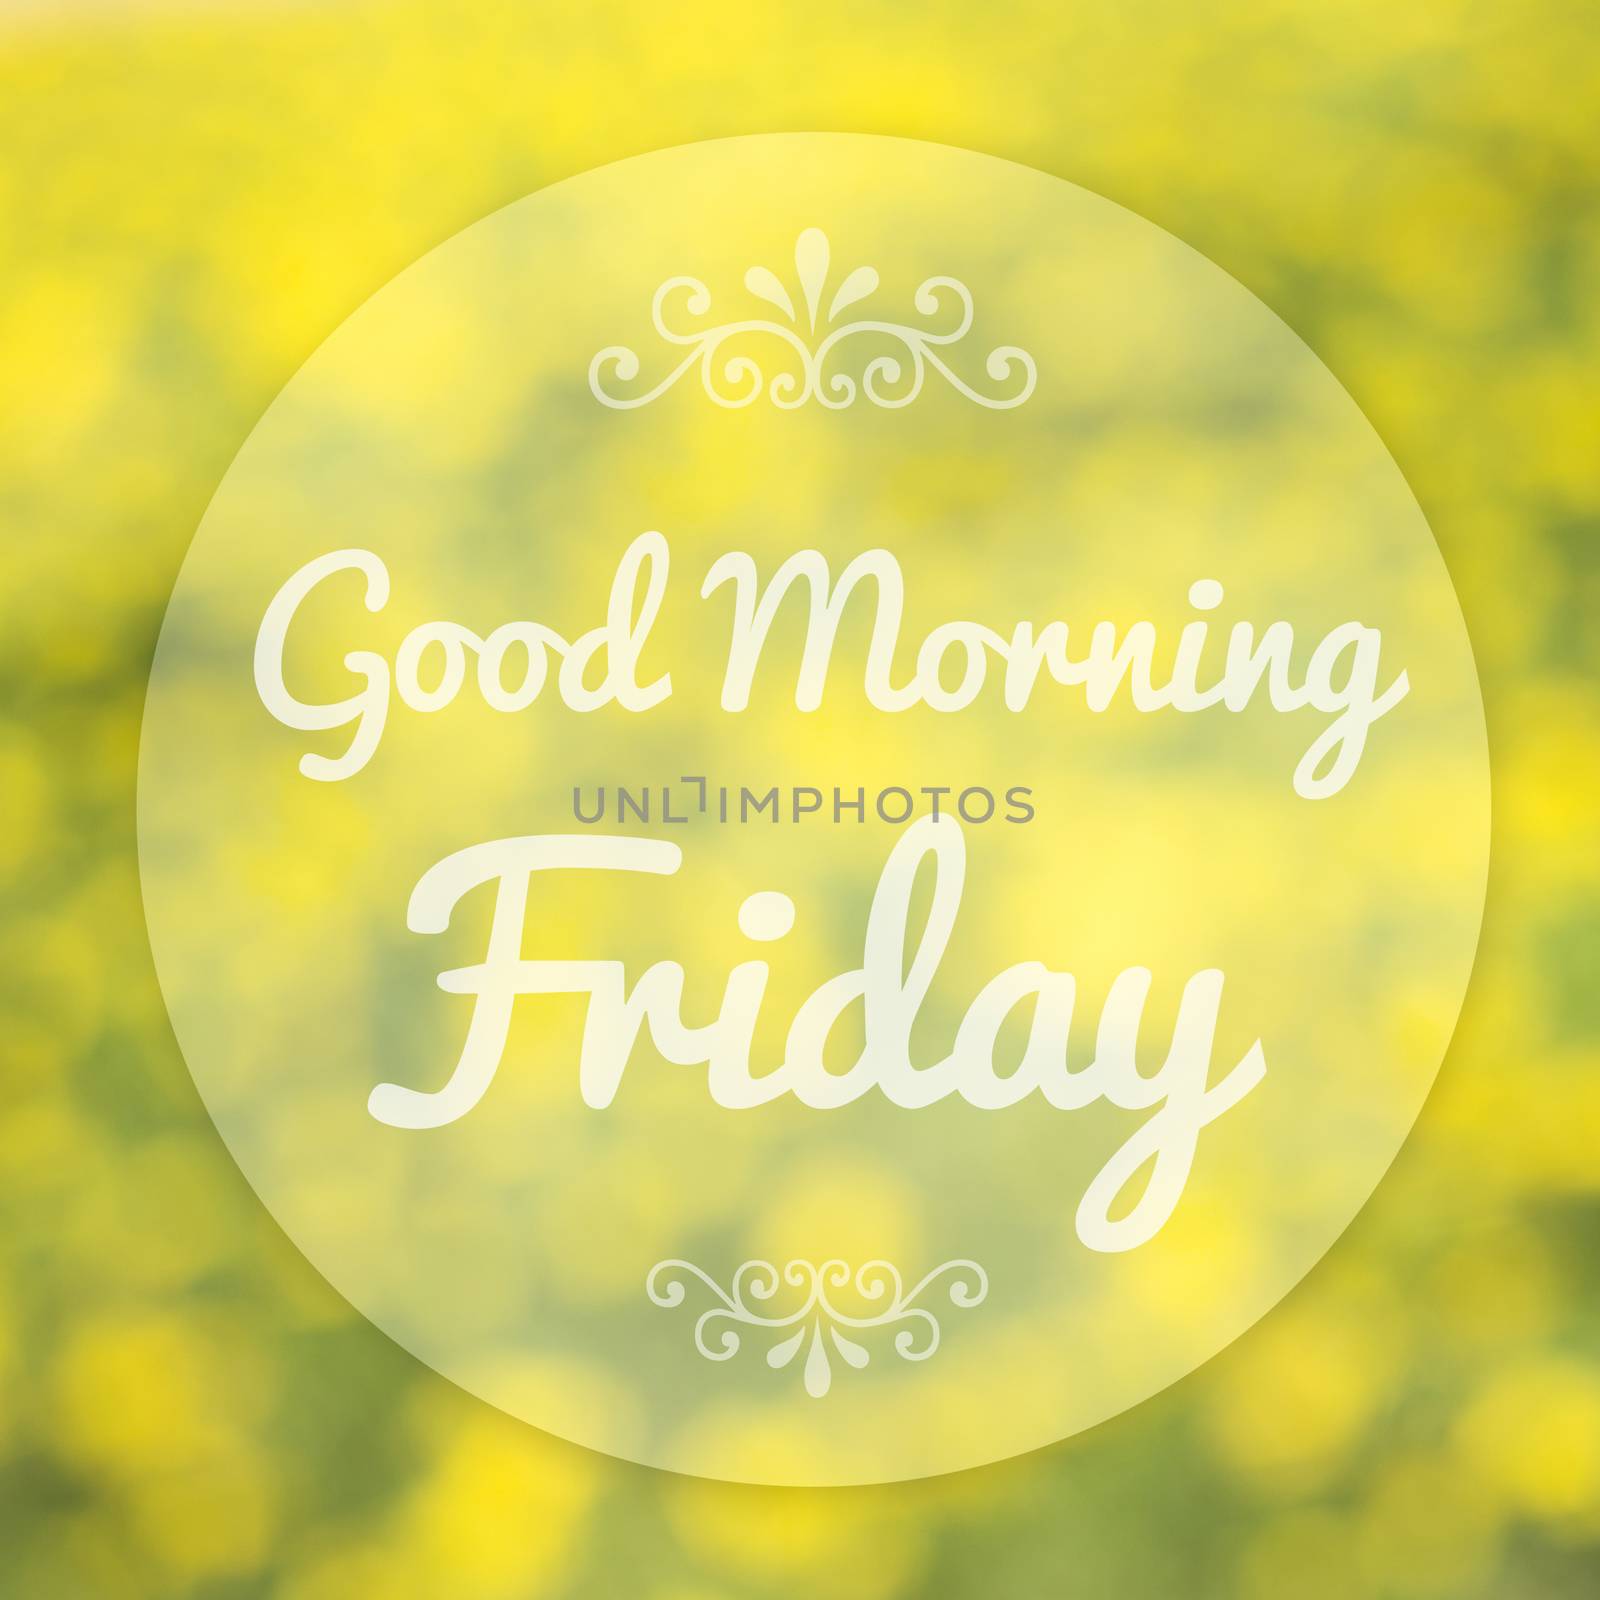 Good Morning Friday on blur background by 2nix